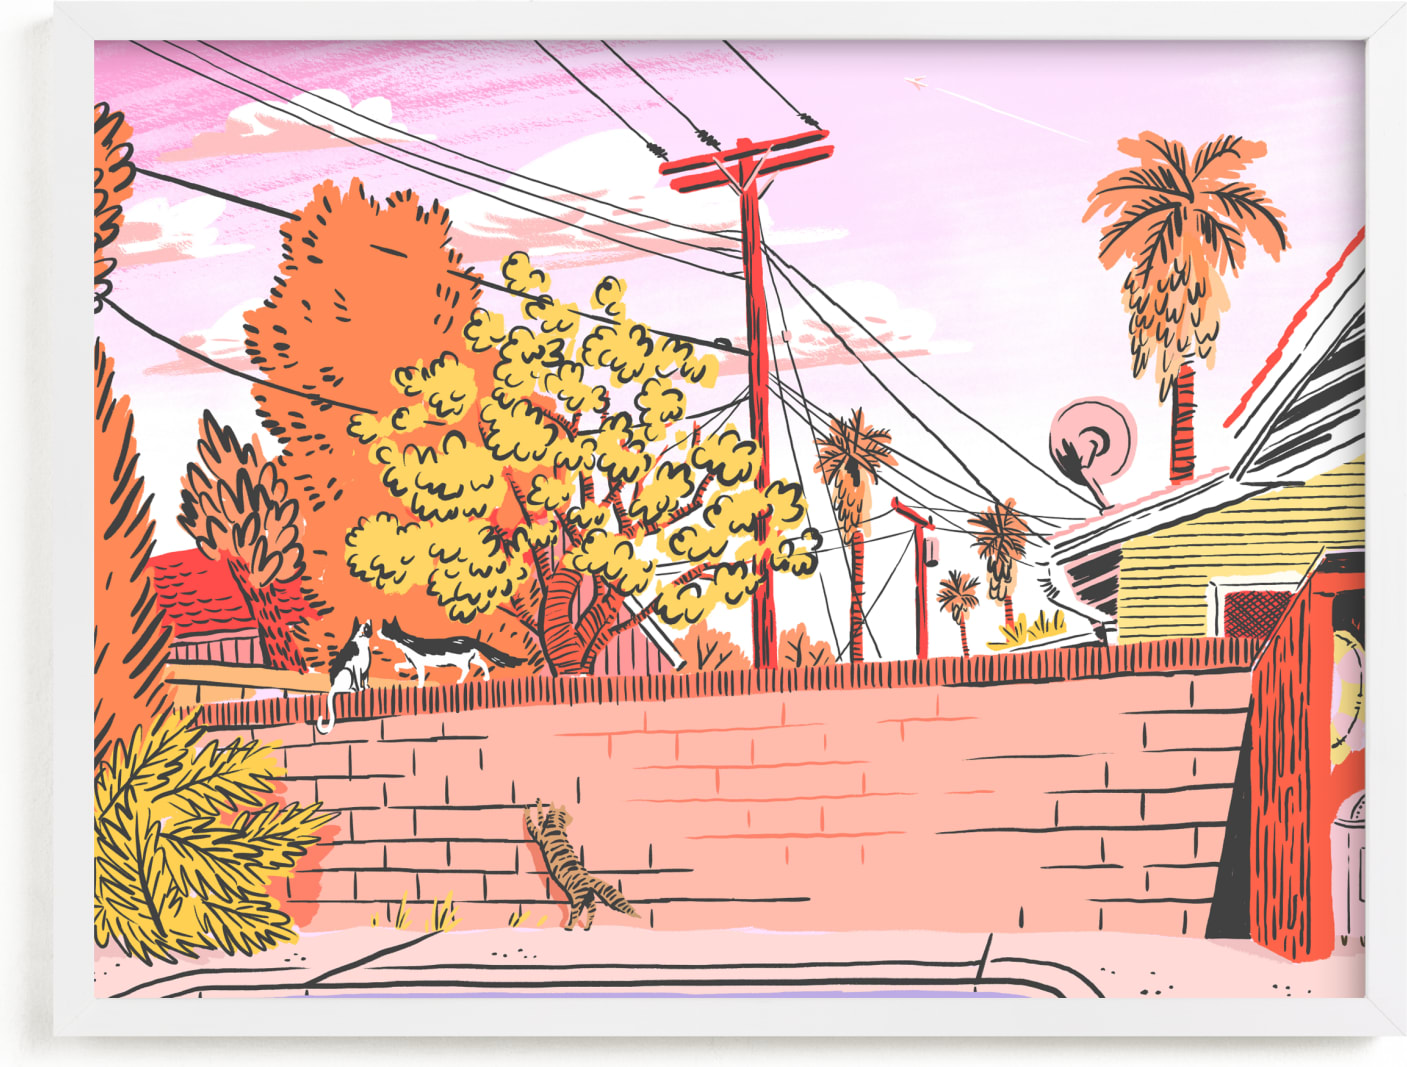 This is a pink art by Evan Clark called West Coast Backyard.